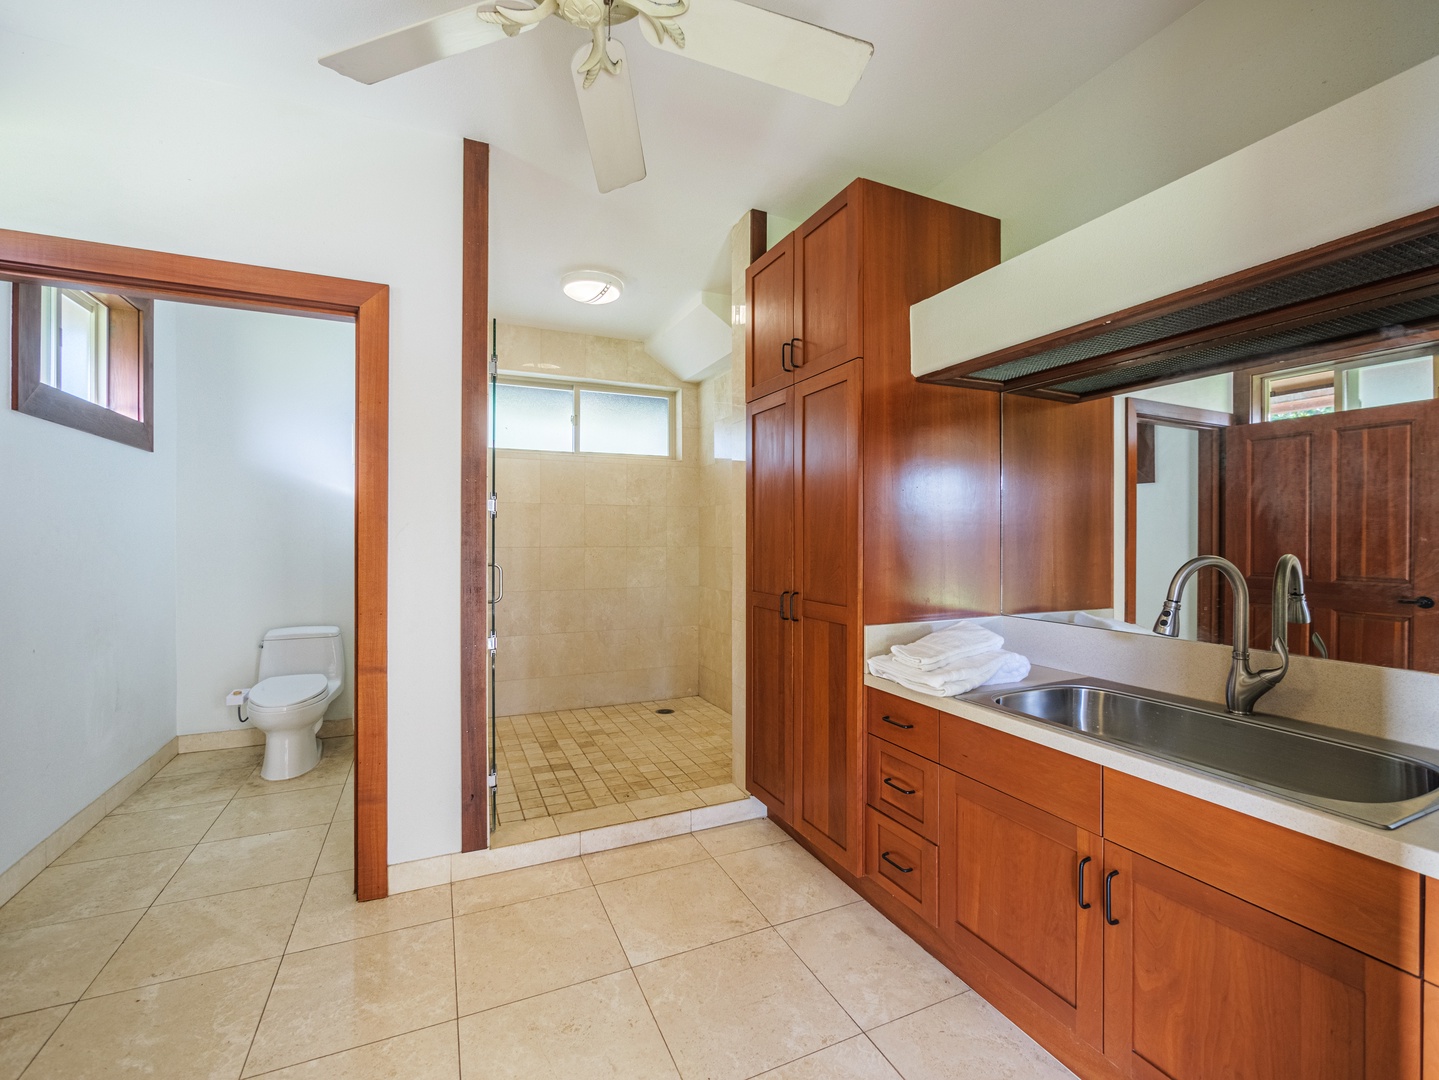 Waianae Vacation Rentals, Konishiki Beachhouse - Ensuite bathroom with an enclosed walk-in shower, closet and wide vanity area.